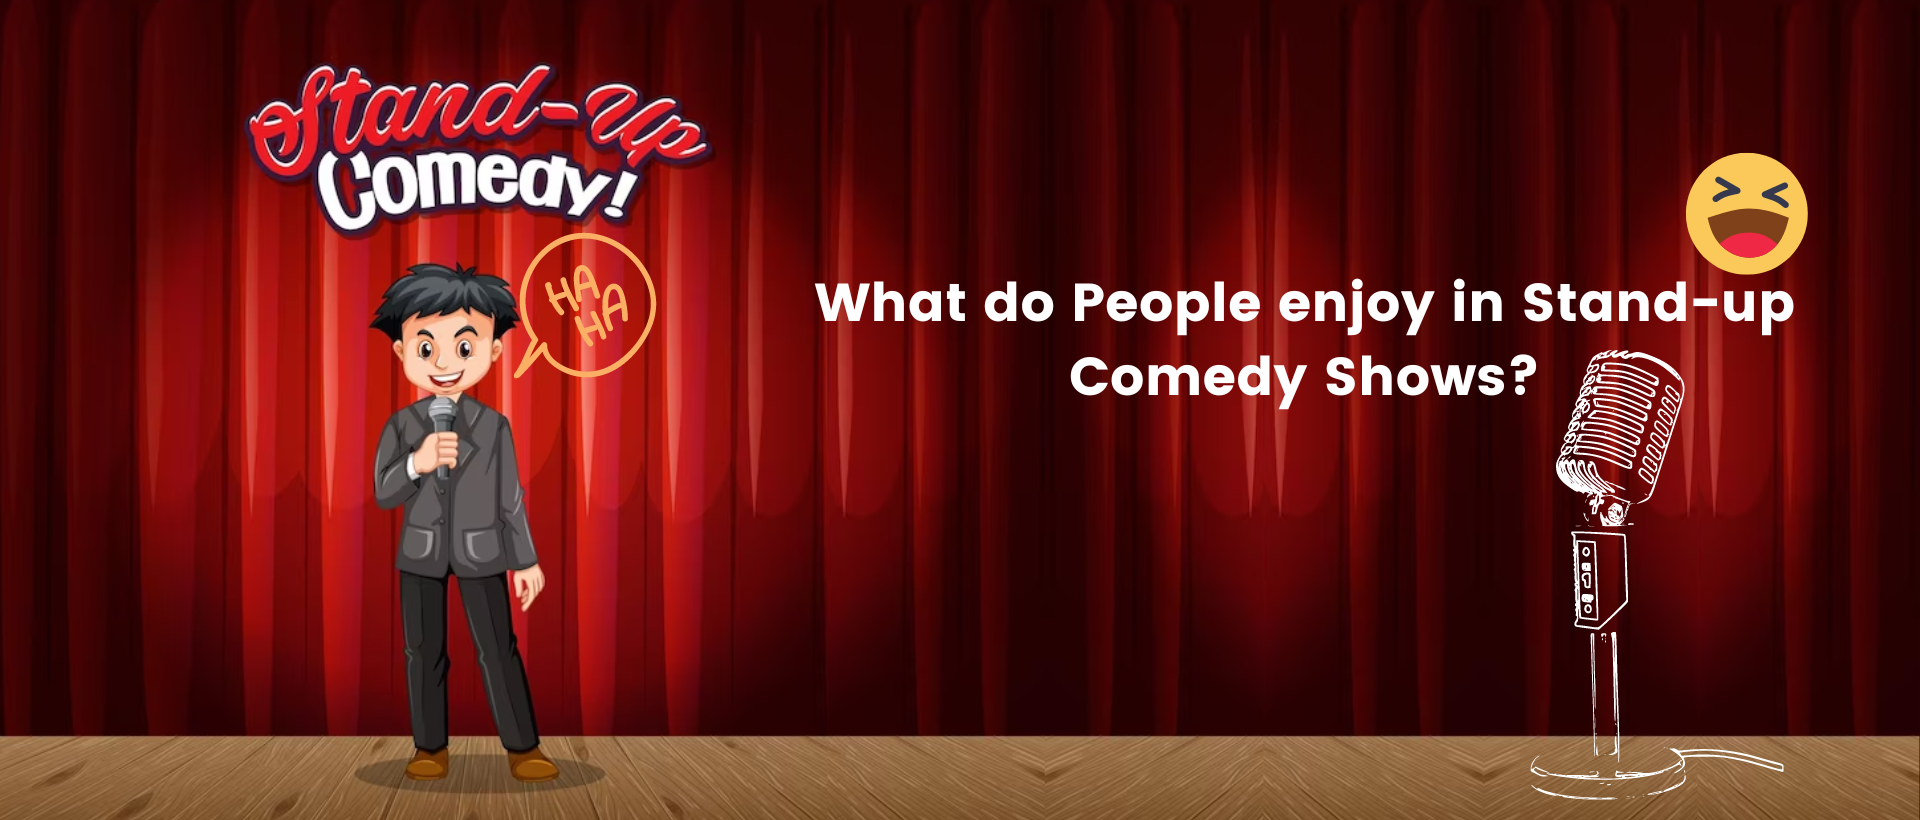 What do people enjoy in stand-up comedy shows?